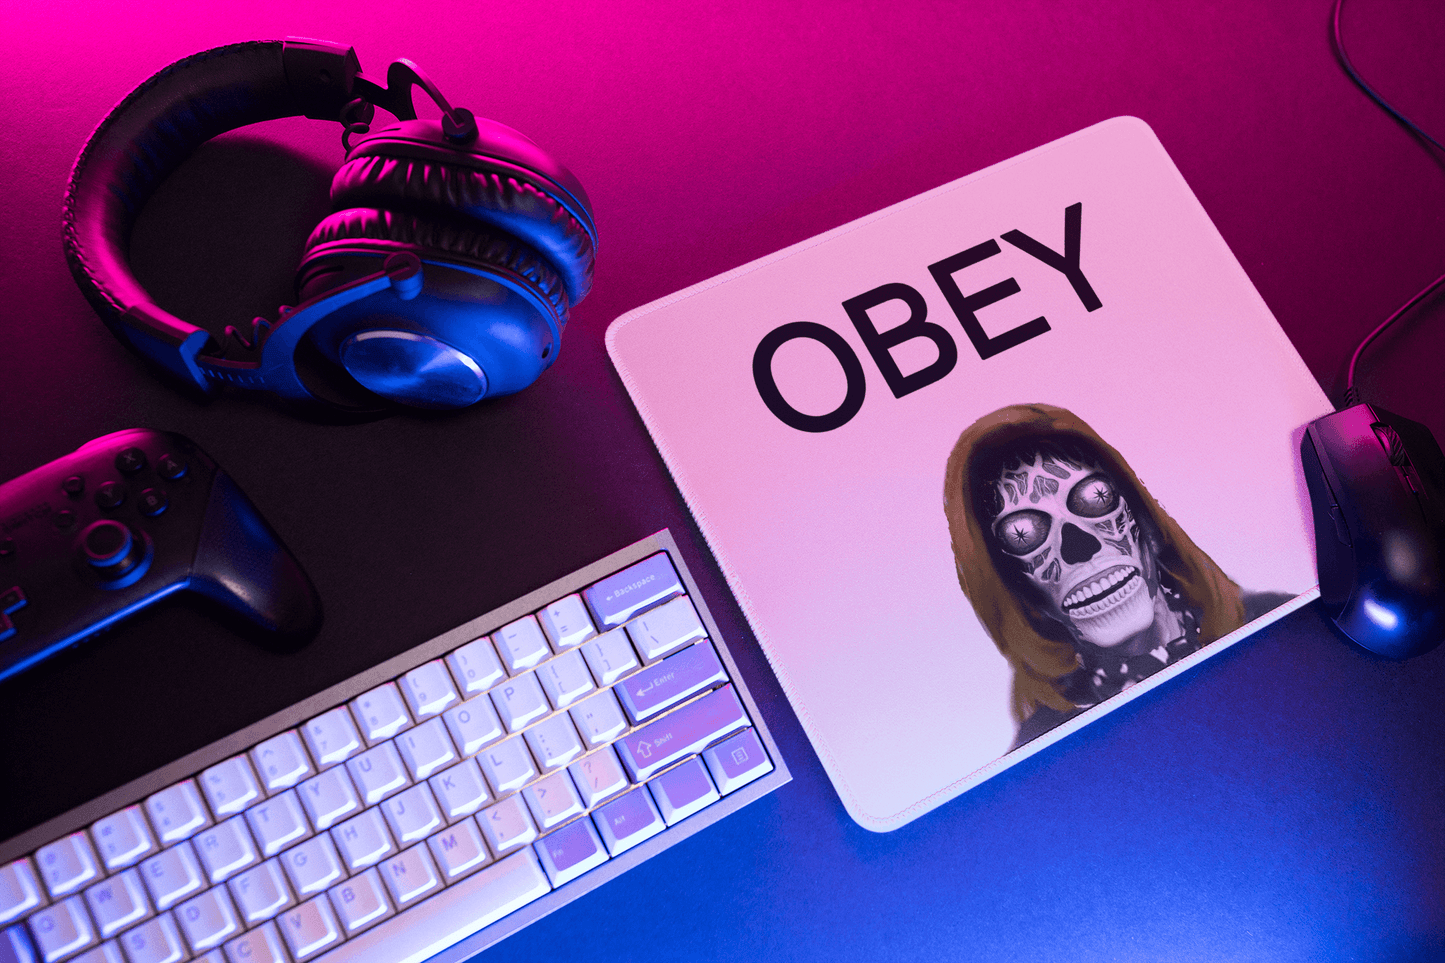 OBEY - Mouse pad